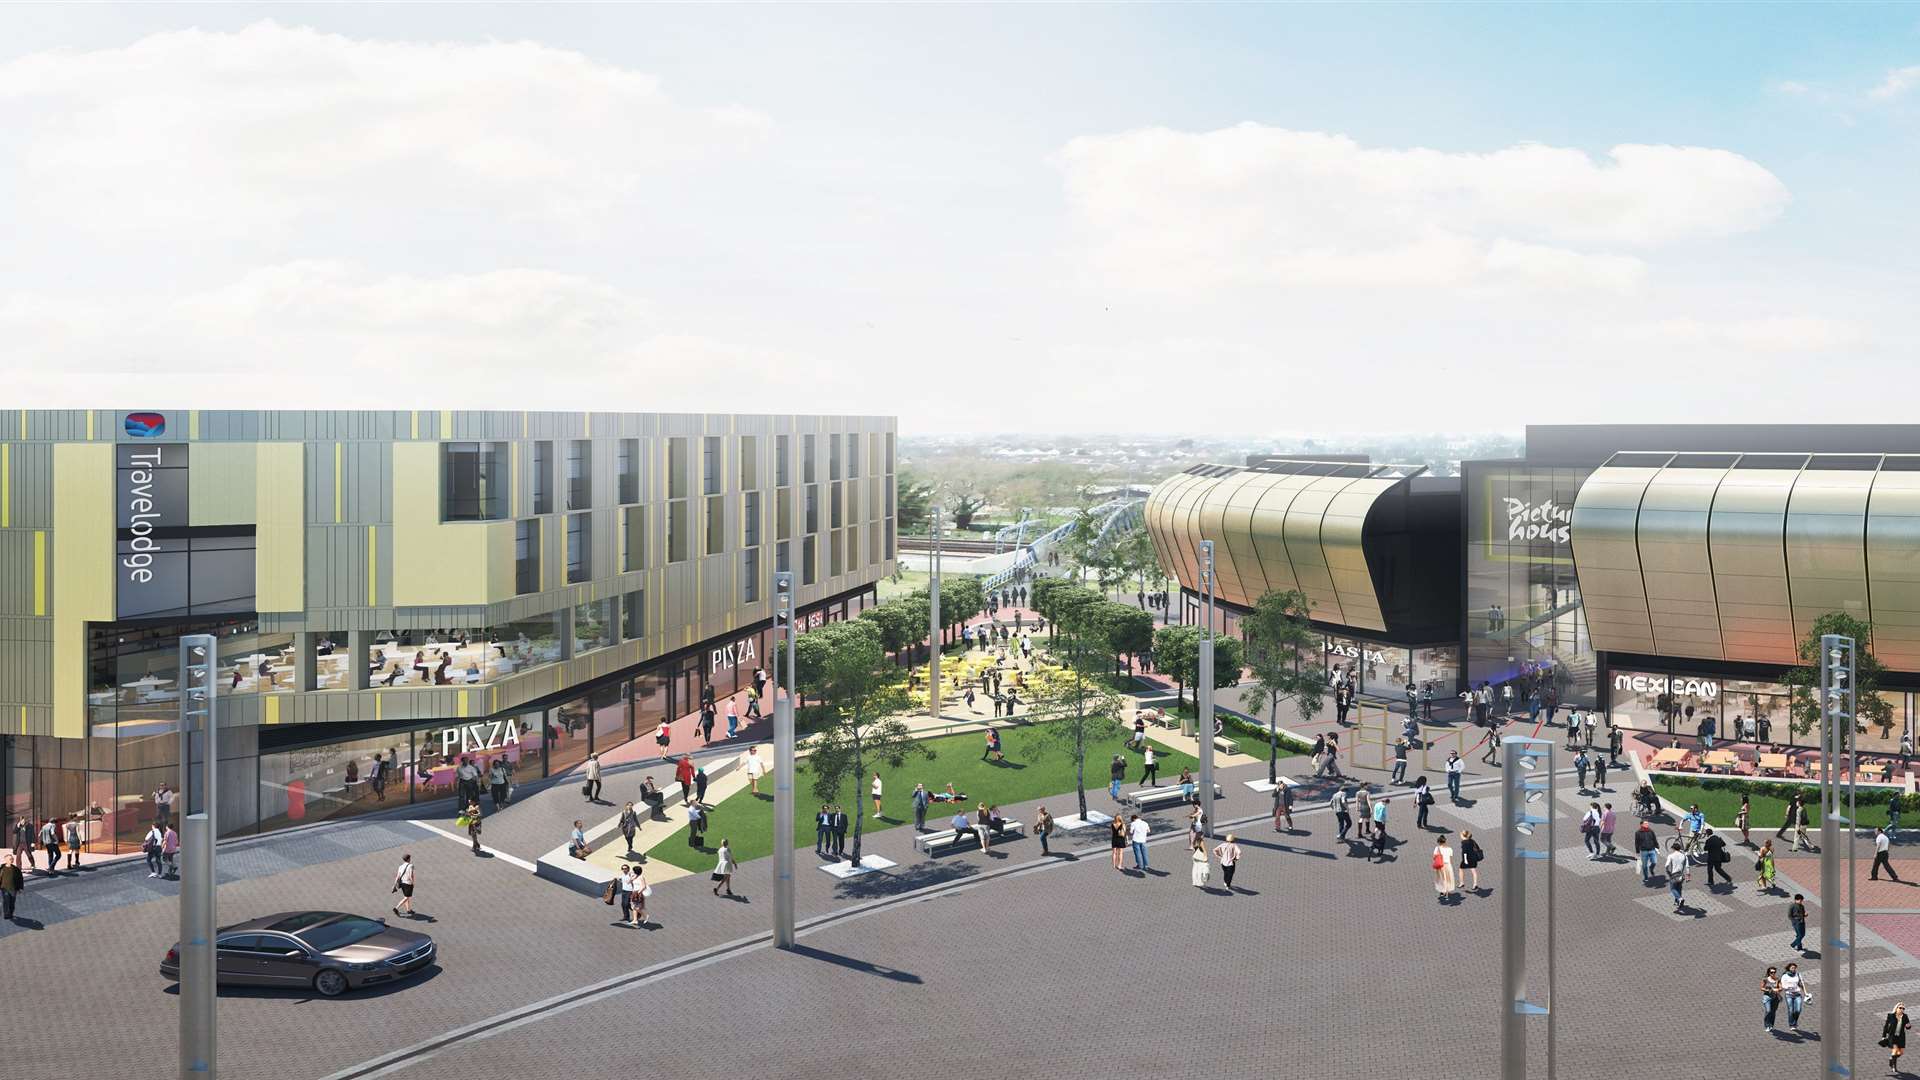 There will be a £75 million cinema and hotel complex in Ashford